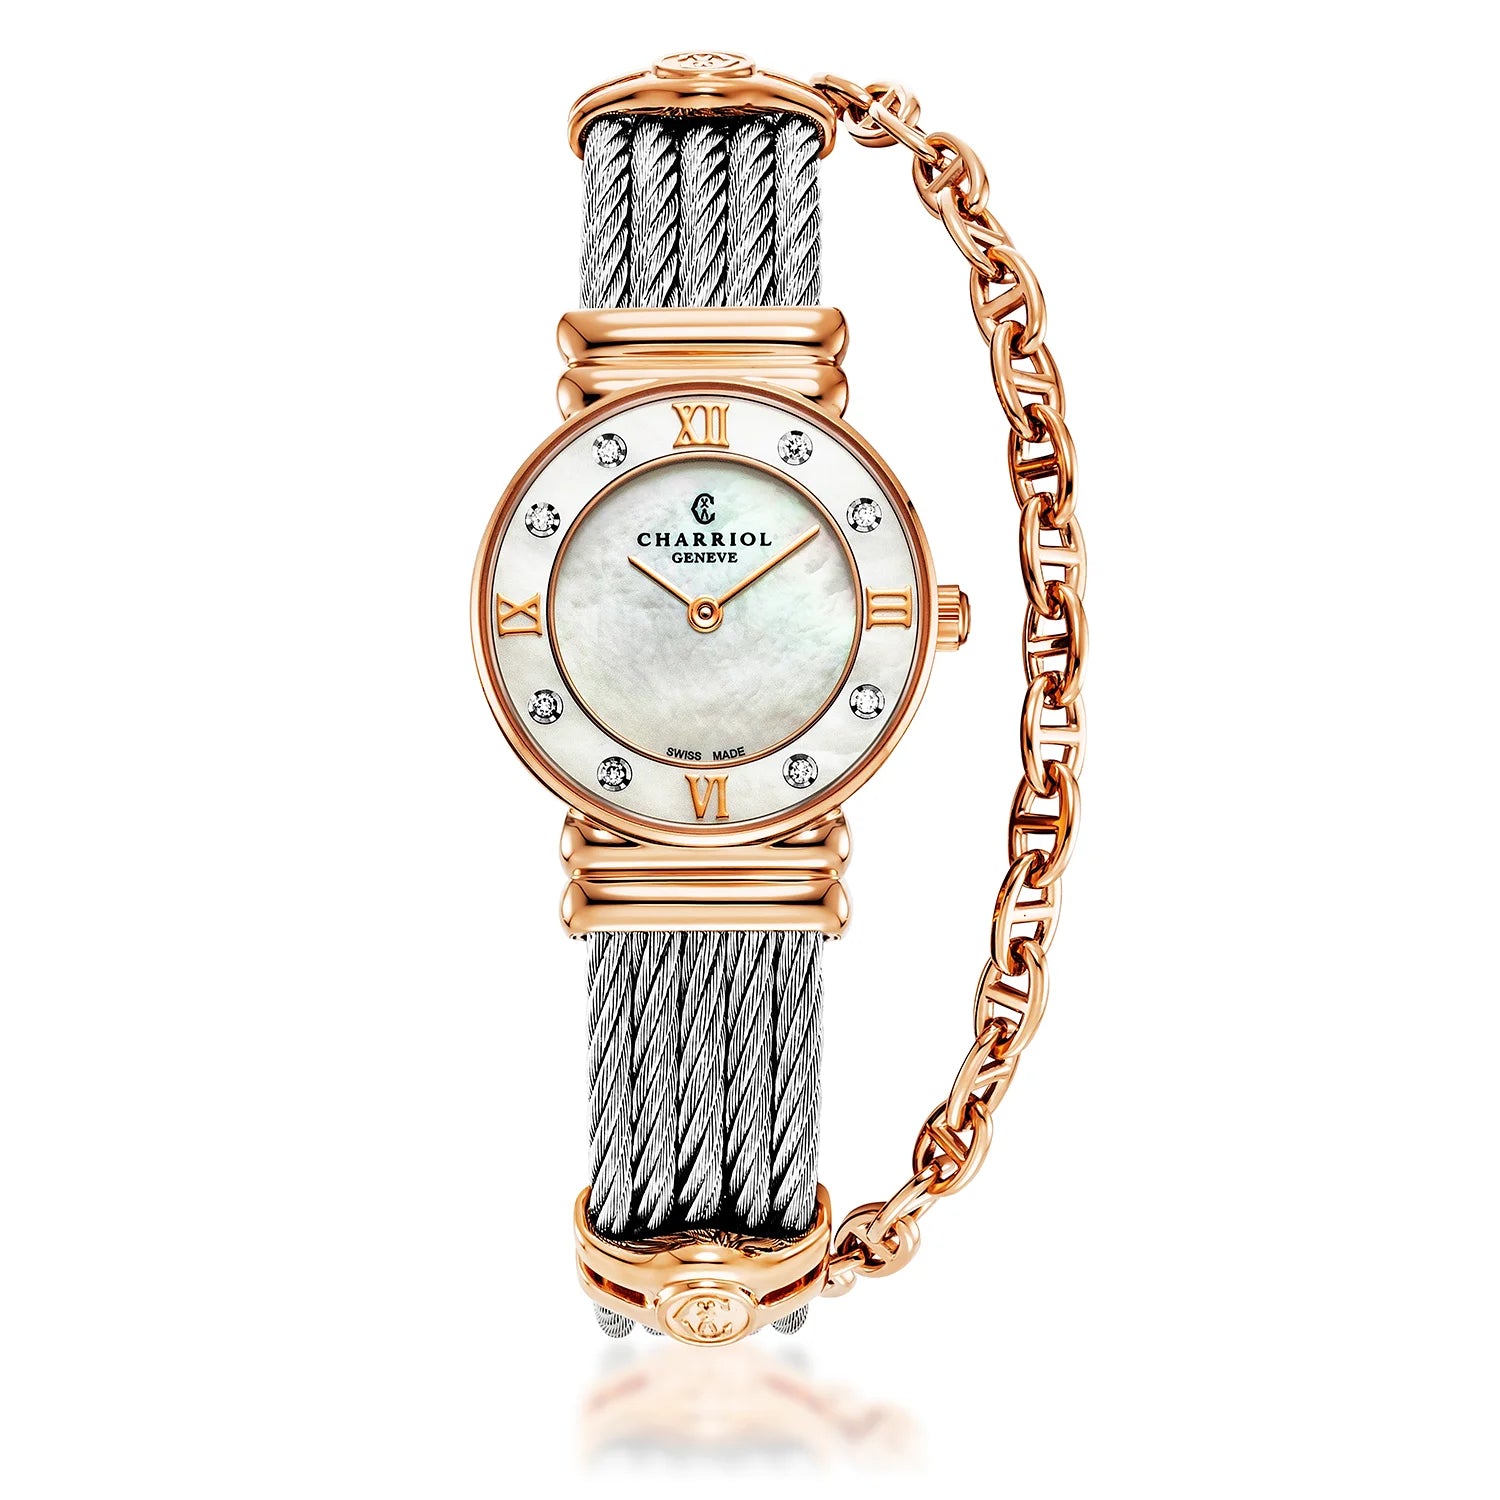 St Tropez Icon 24.5mm Watch Rose Gold PVD, Steel Cable, 8 Diamonds Bezel and White MOP dial